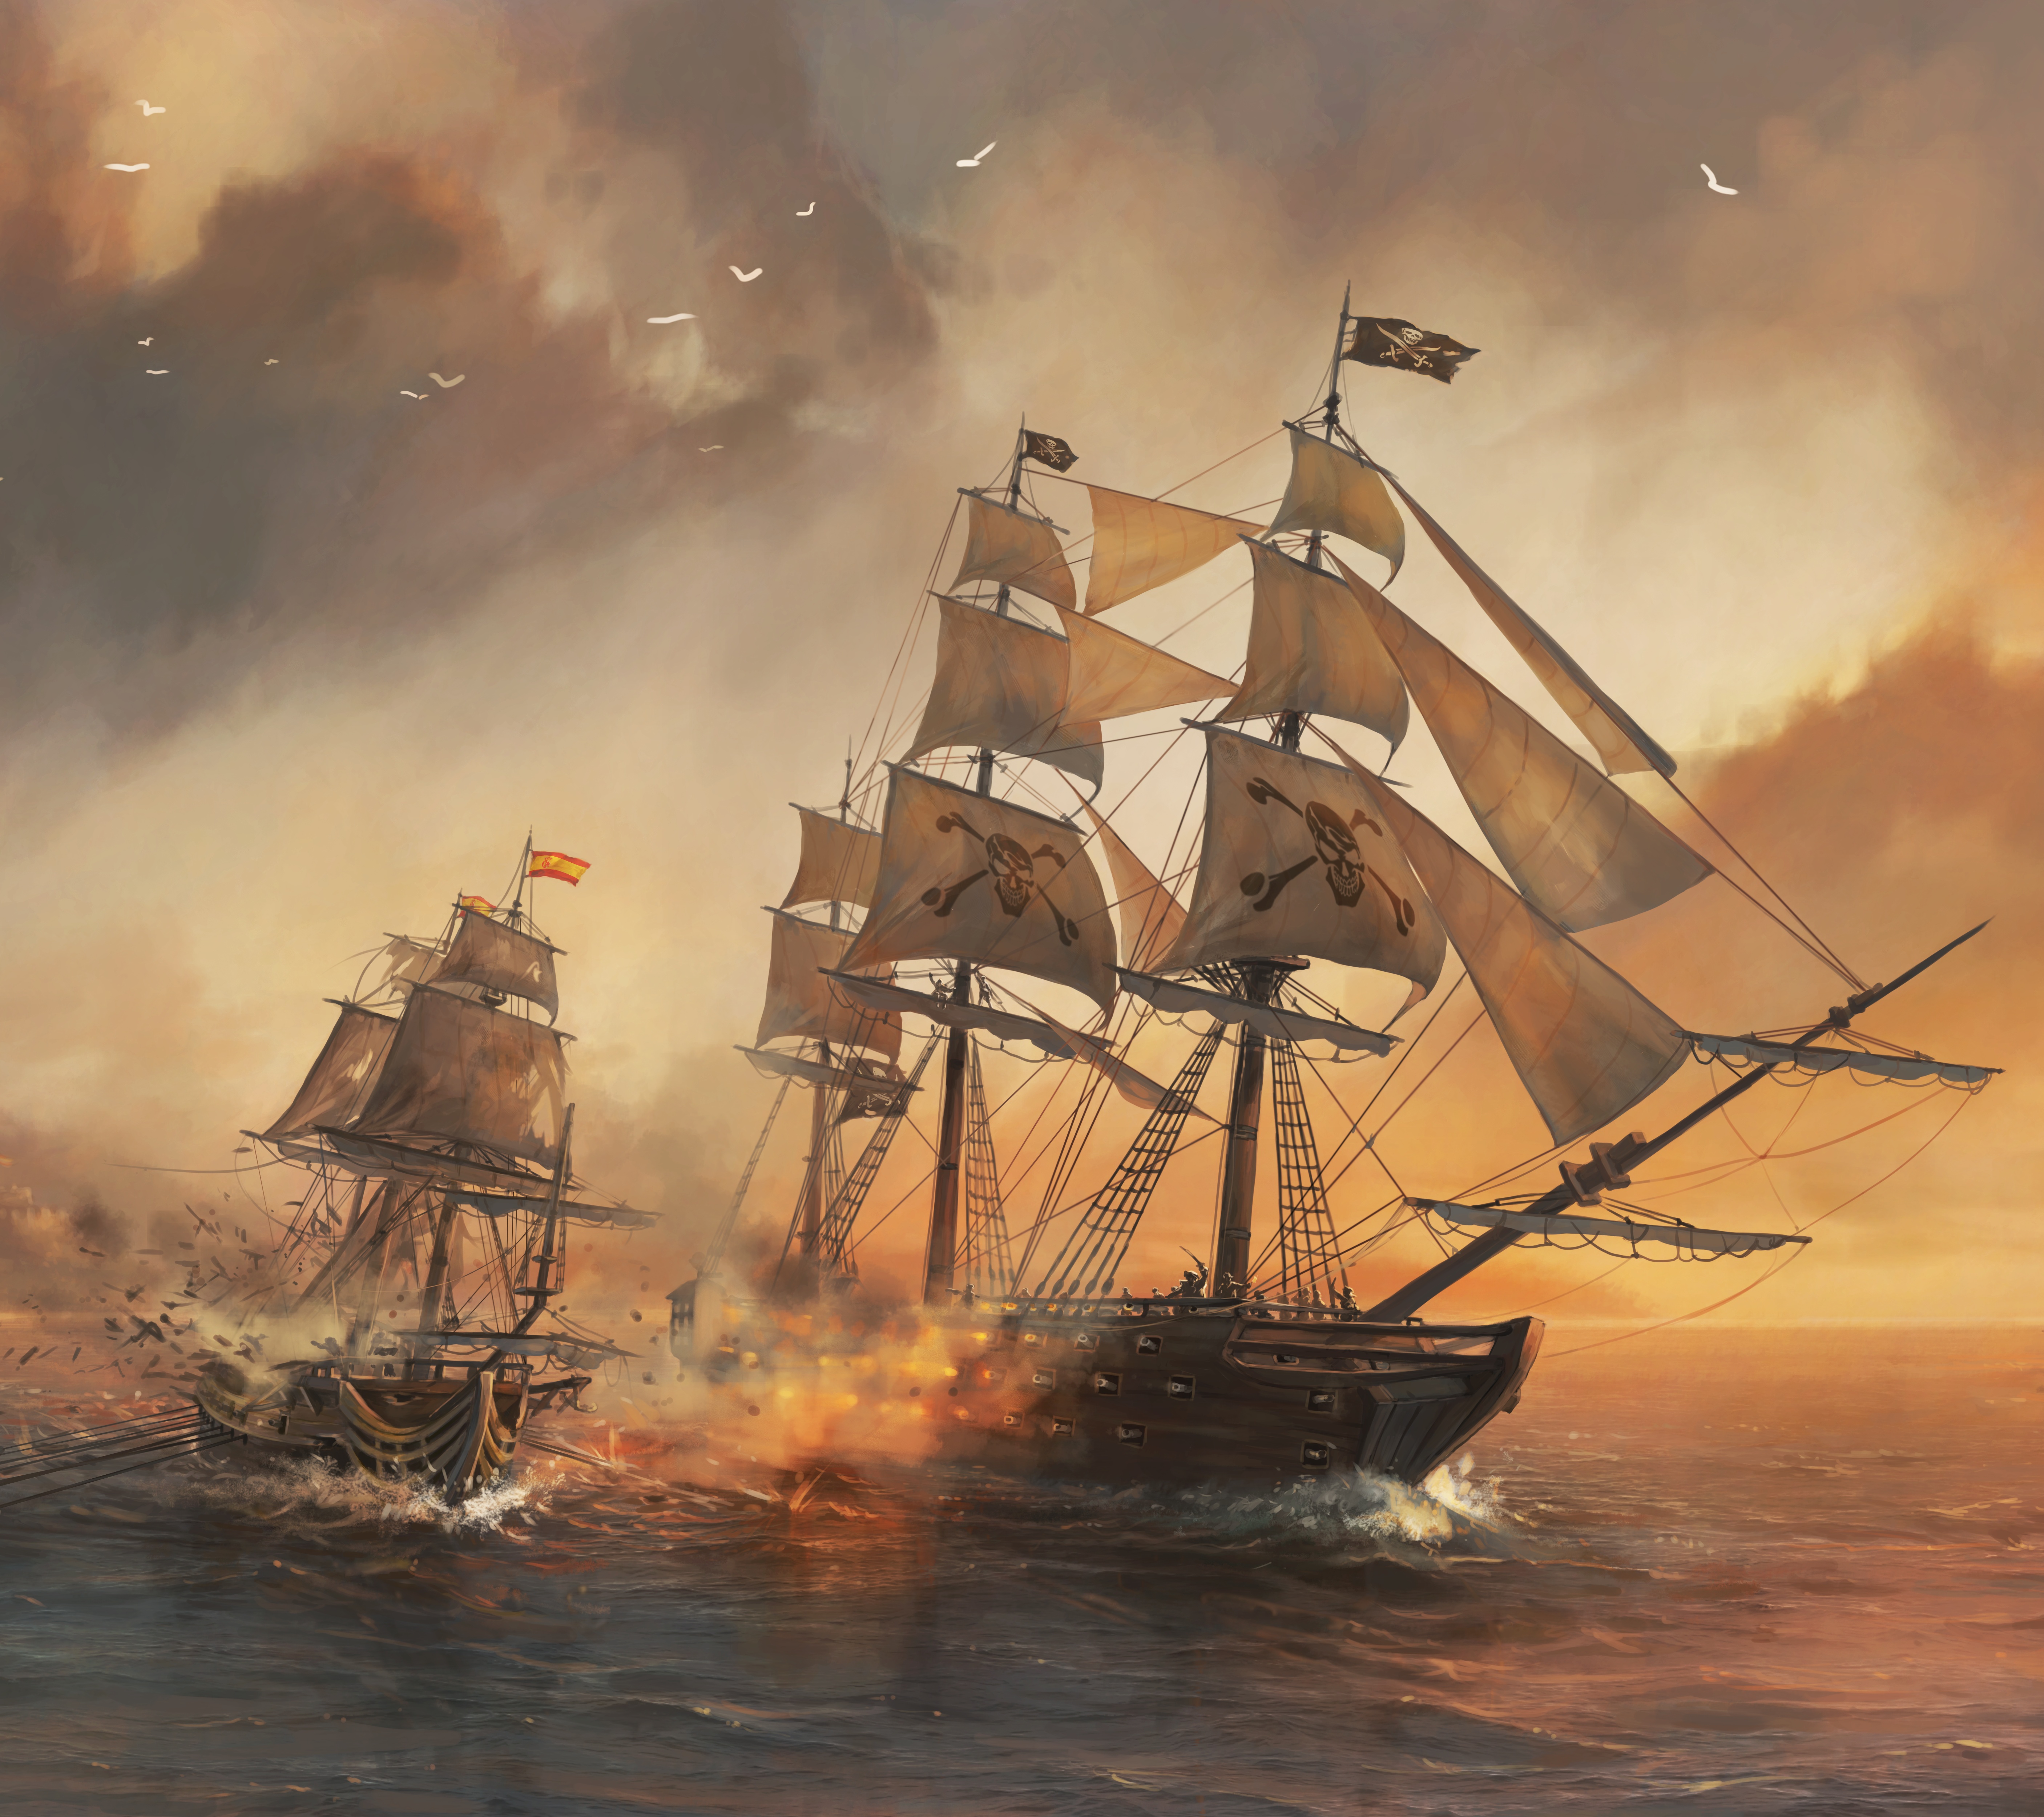 The Pirate: Caribbean Hunt wallpaper is now available for download. The Pirate: Caribbean Hunt